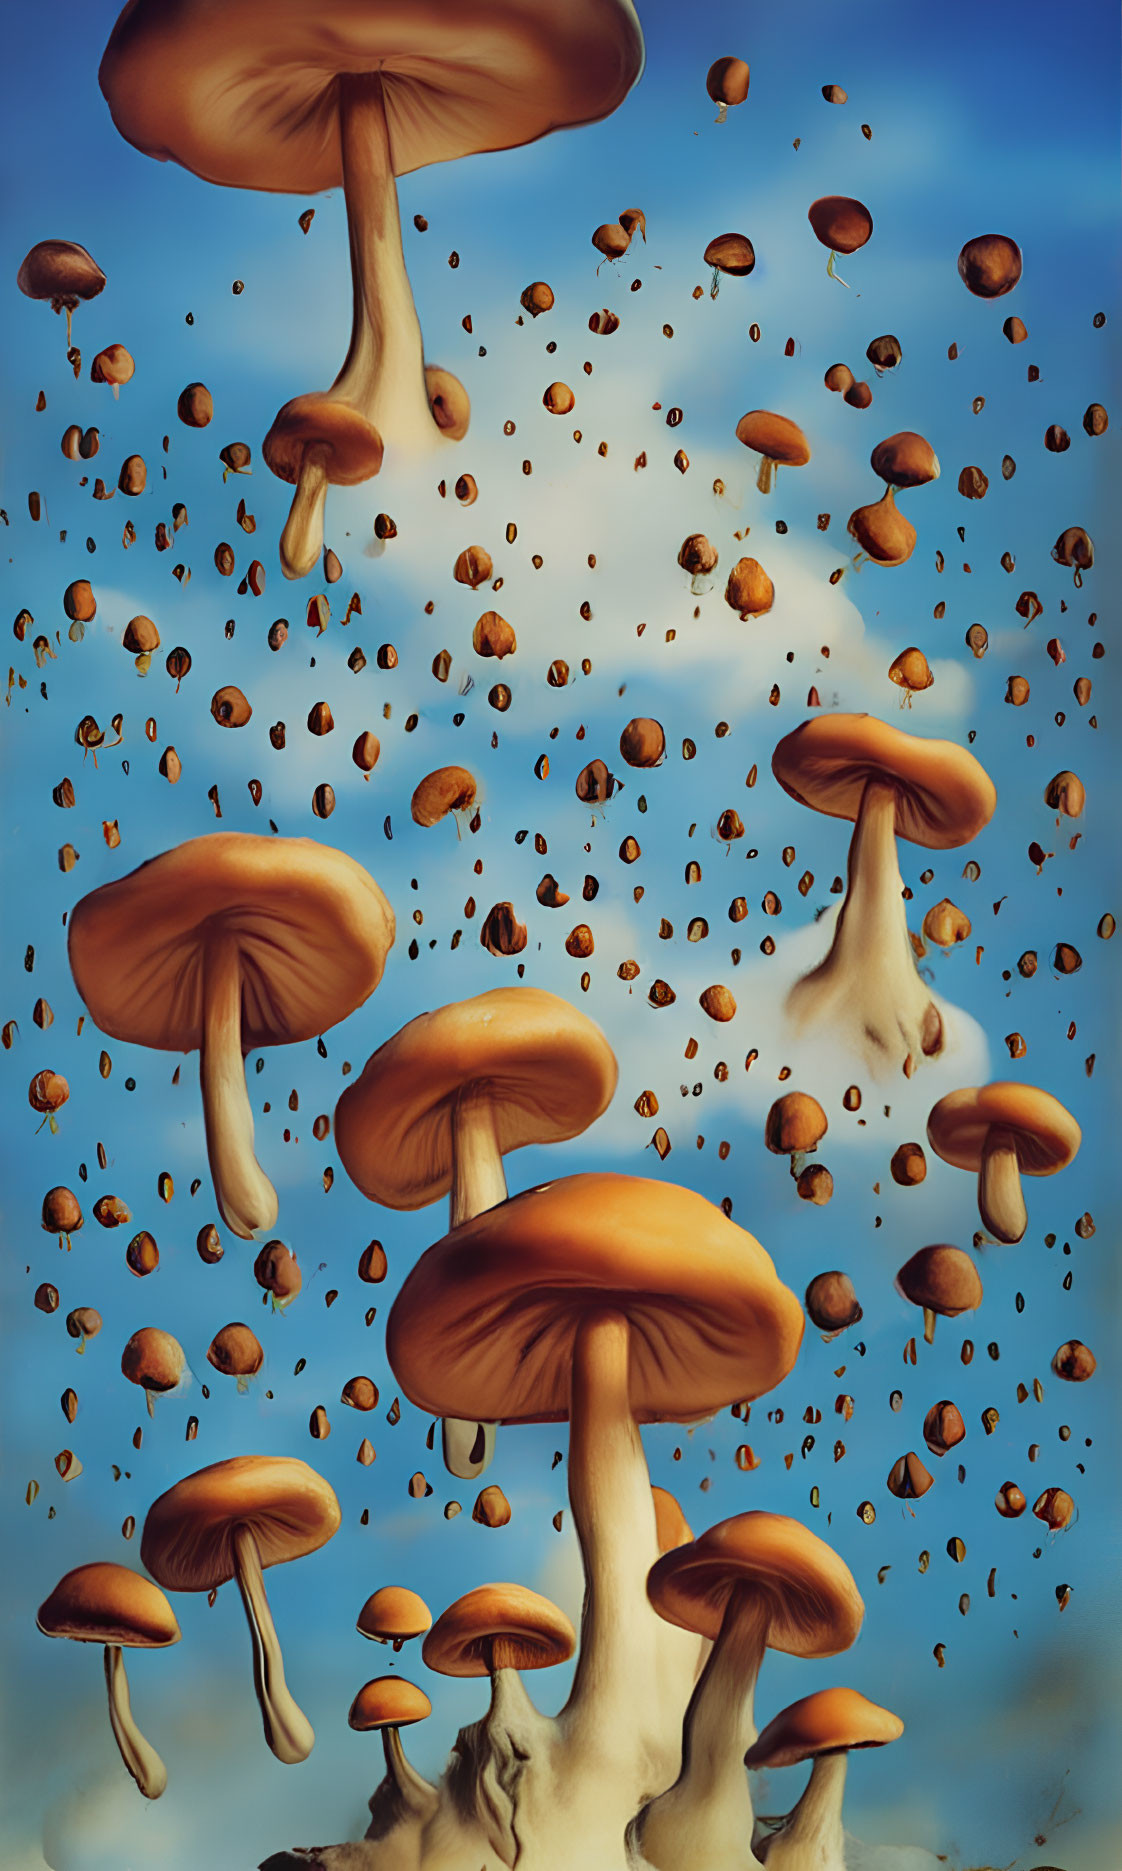 Surreal oversized mushrooms with smaller ones against a blue sky